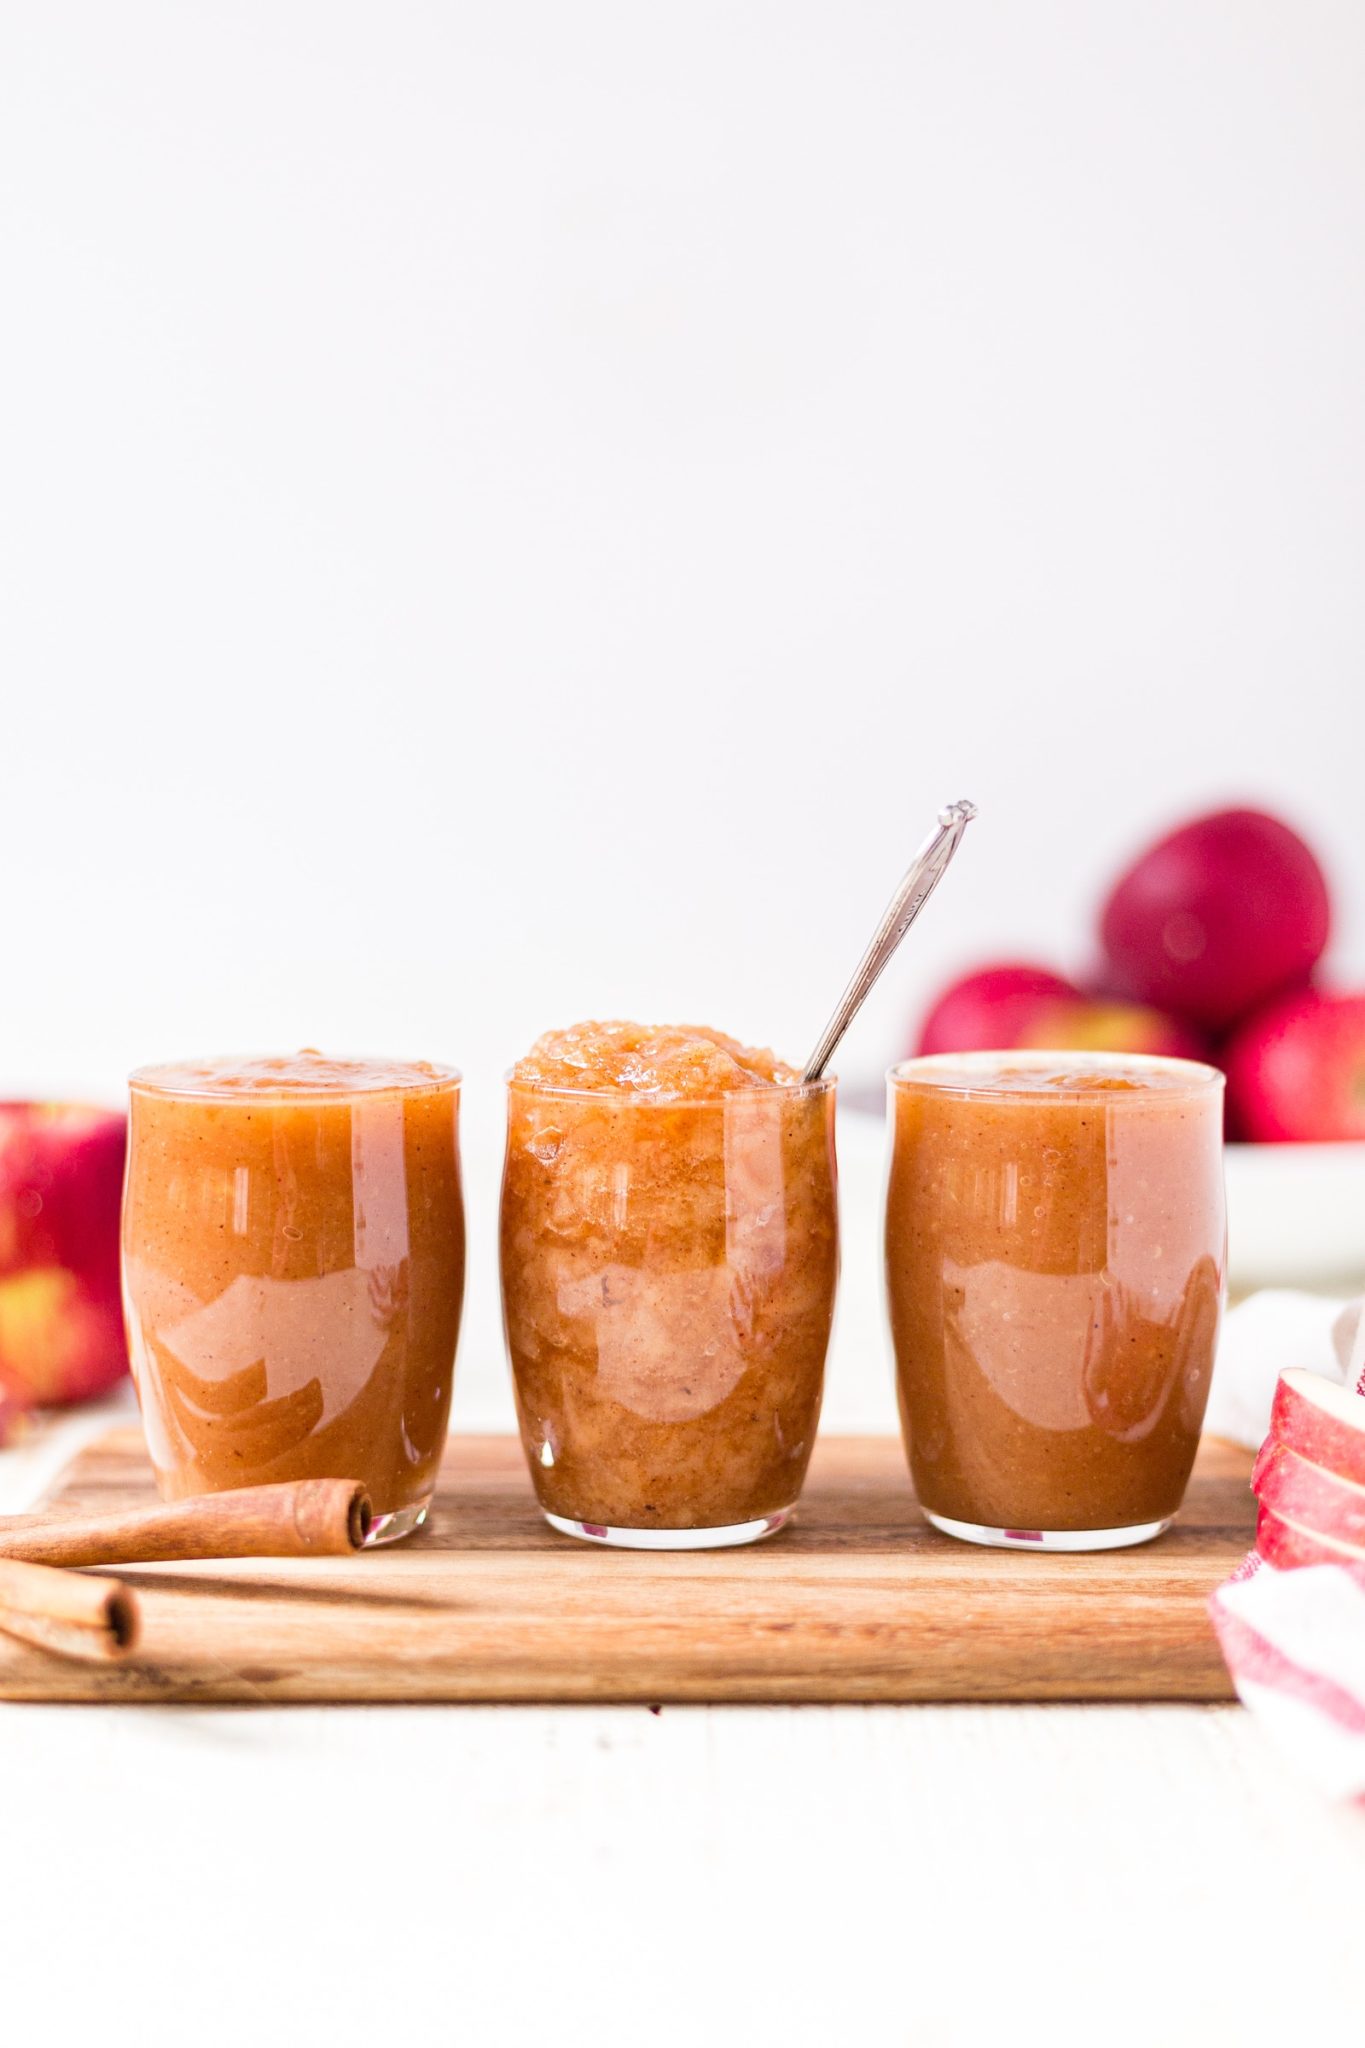 chunky and smooth crockpot applesauce in three jars on a wood cutting board